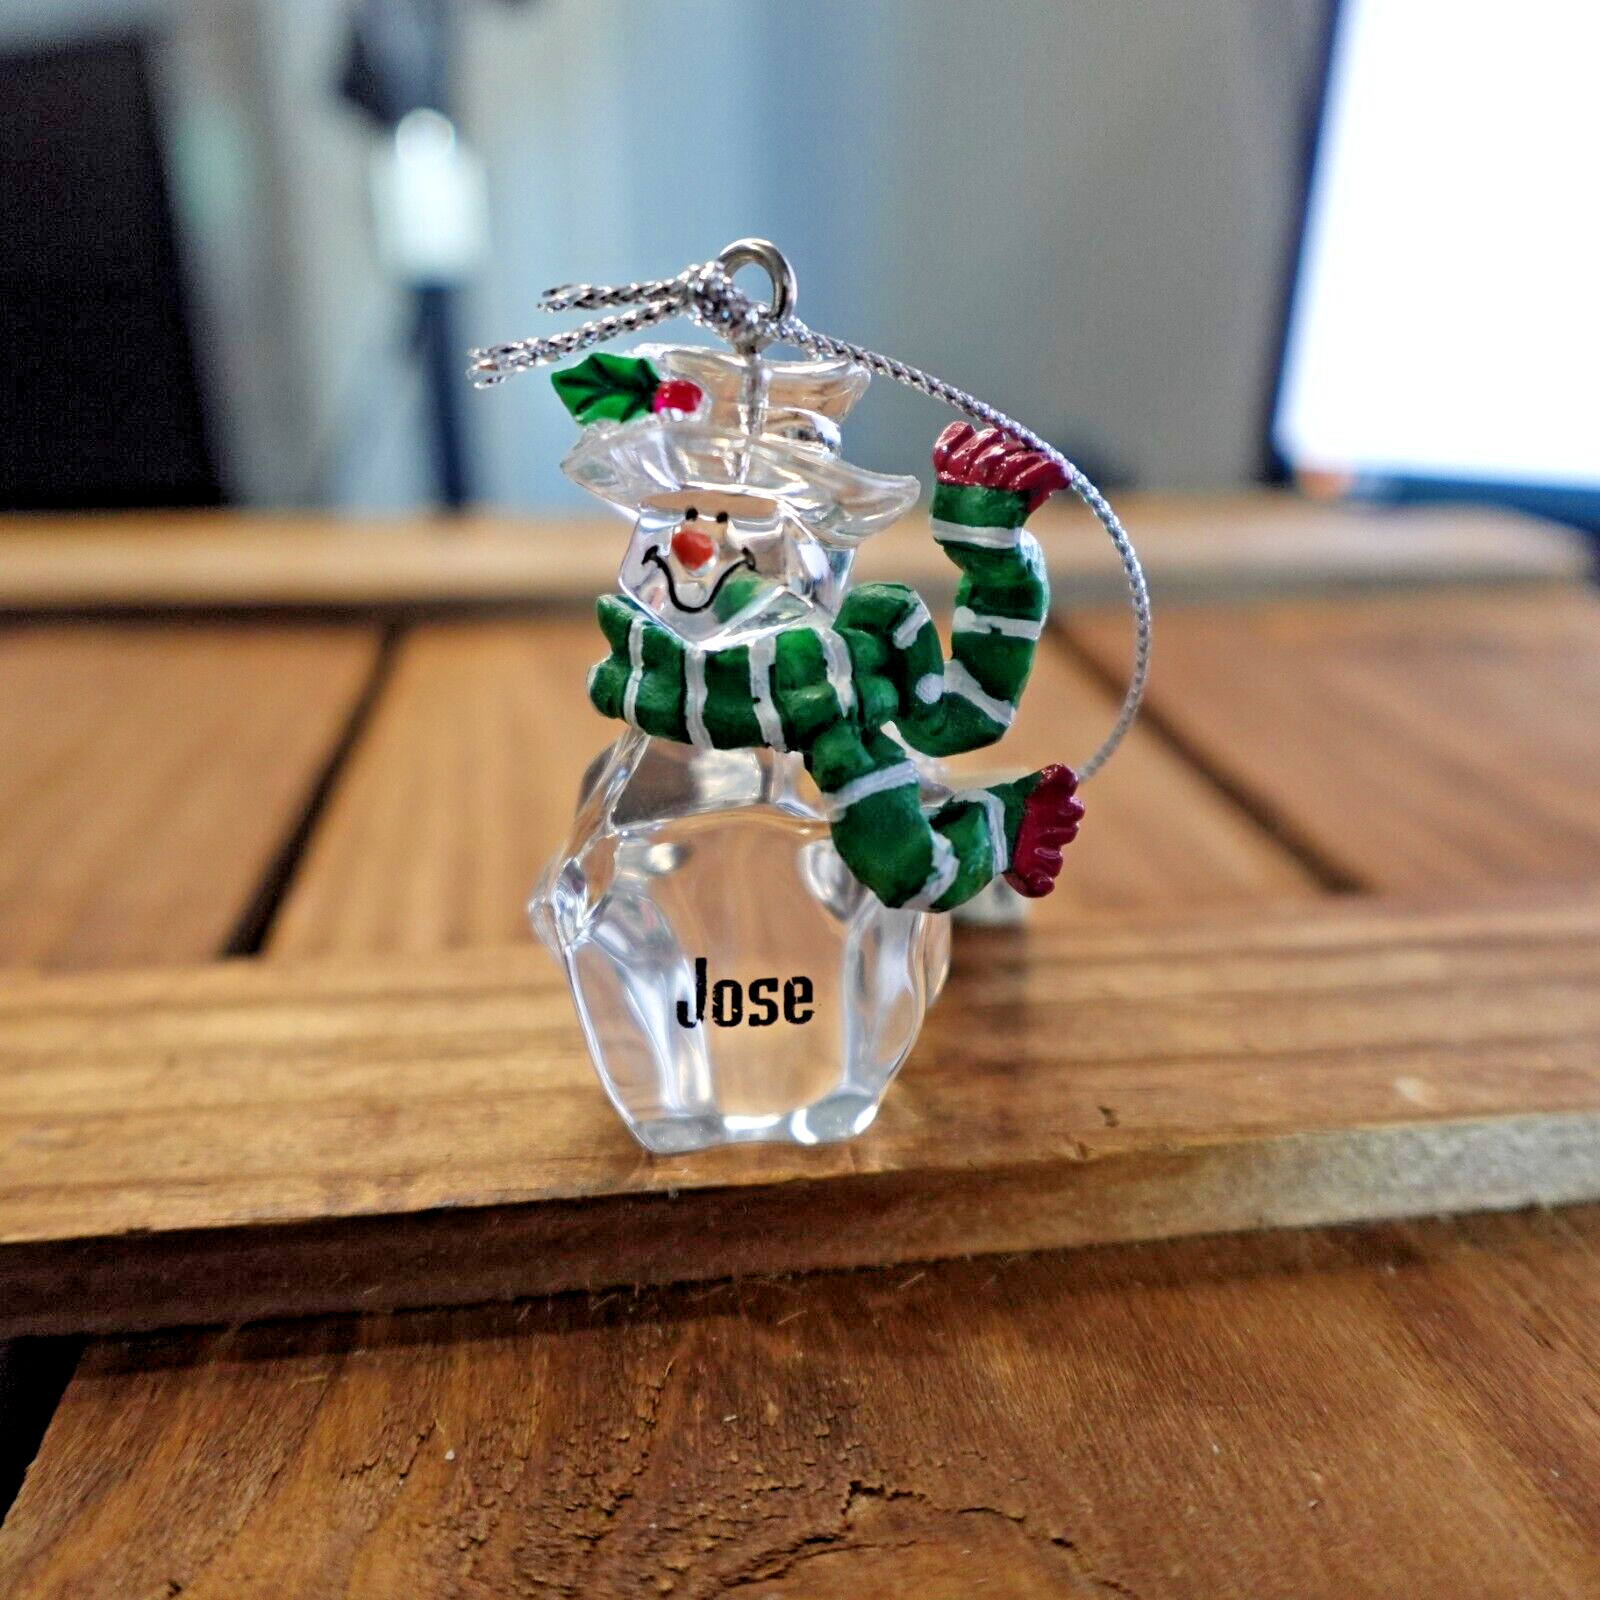 Jose Clear Snowman Christmas Ornament Personalized Name Gift